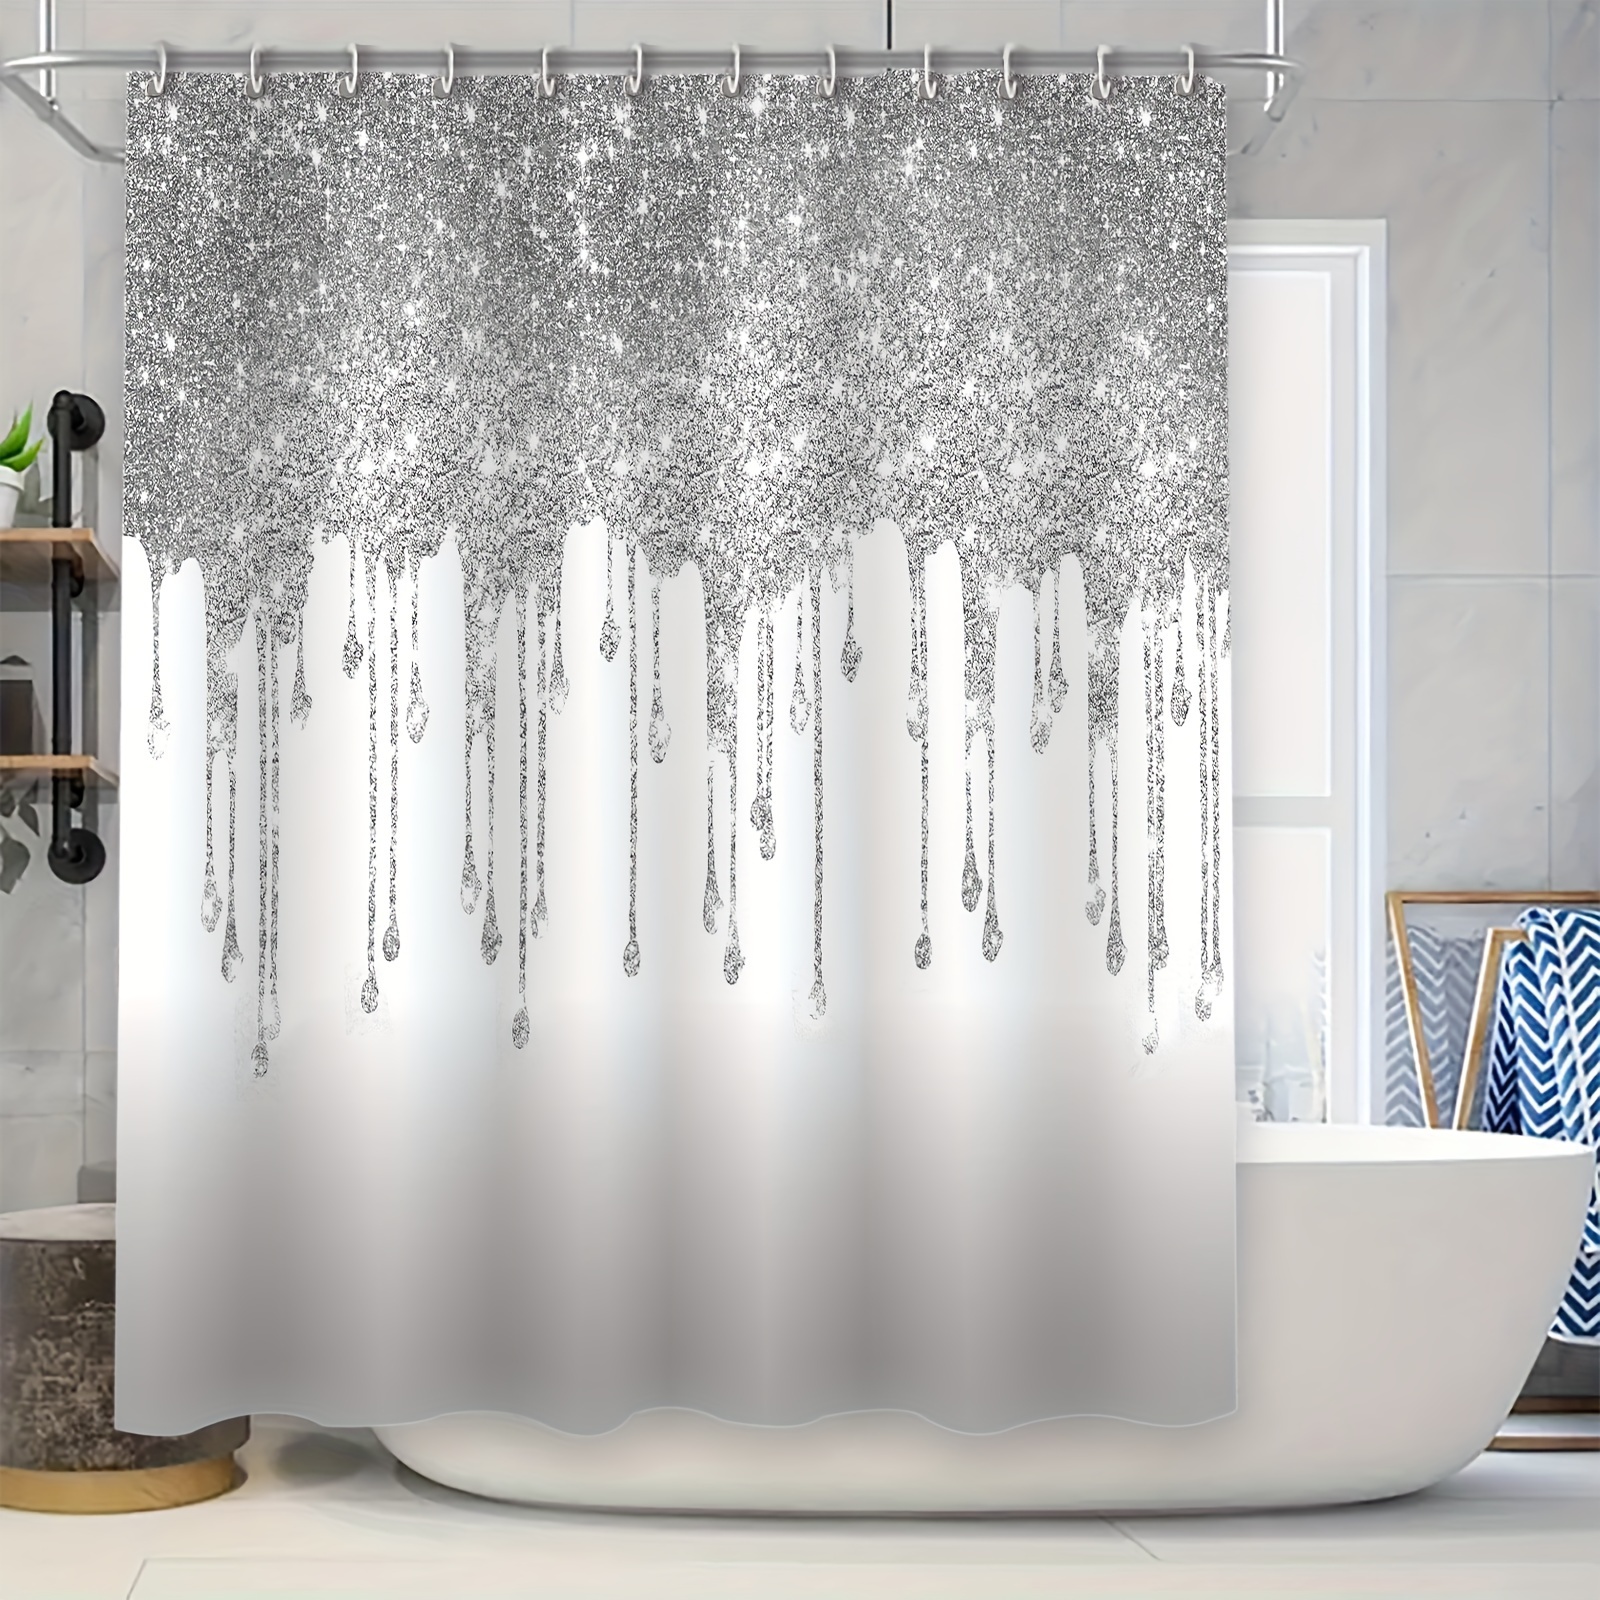 

1pc Sparkling Silver Diamond Design Shower Curtain Set With 12 Hooks, 70.8x70.8 Inch, Waterproof, Mold-resistant, Stylish Bathroom Partition Curtain For Home Restroom Bathtub Decor